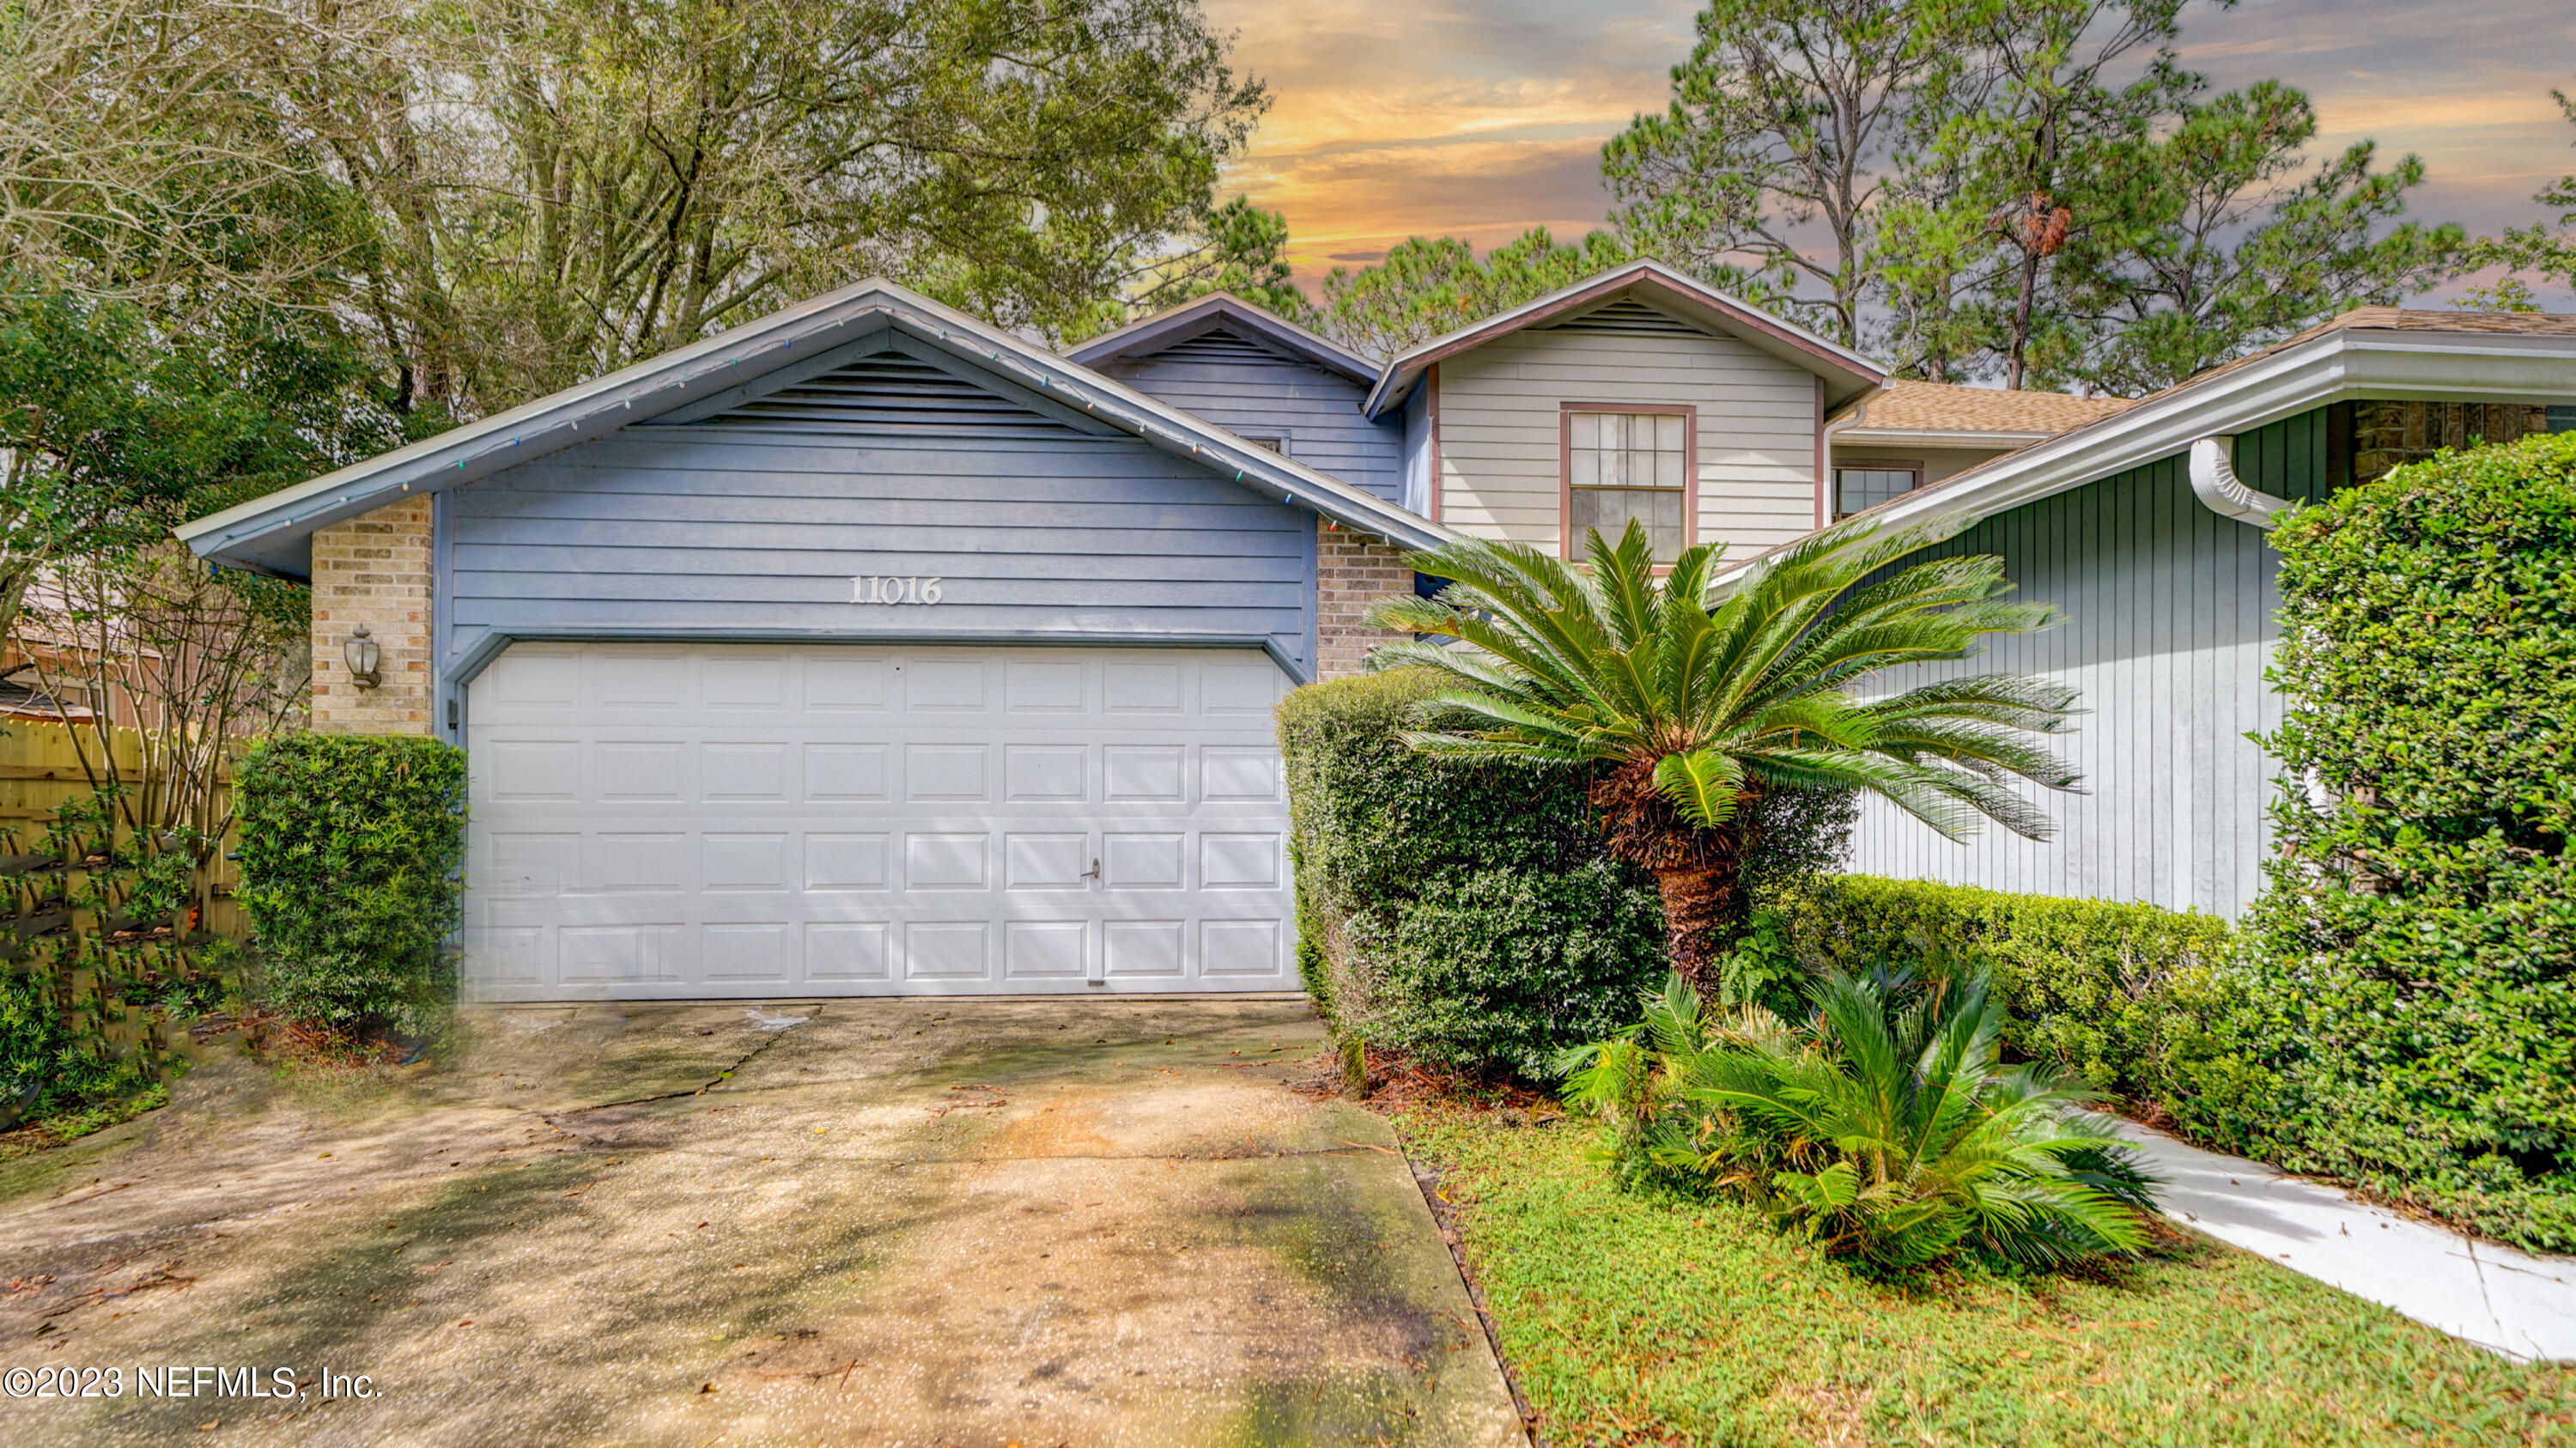 Jacksonville, FL home for sale located at 11016 MILL POND Court, Jacksonville, FL 32257